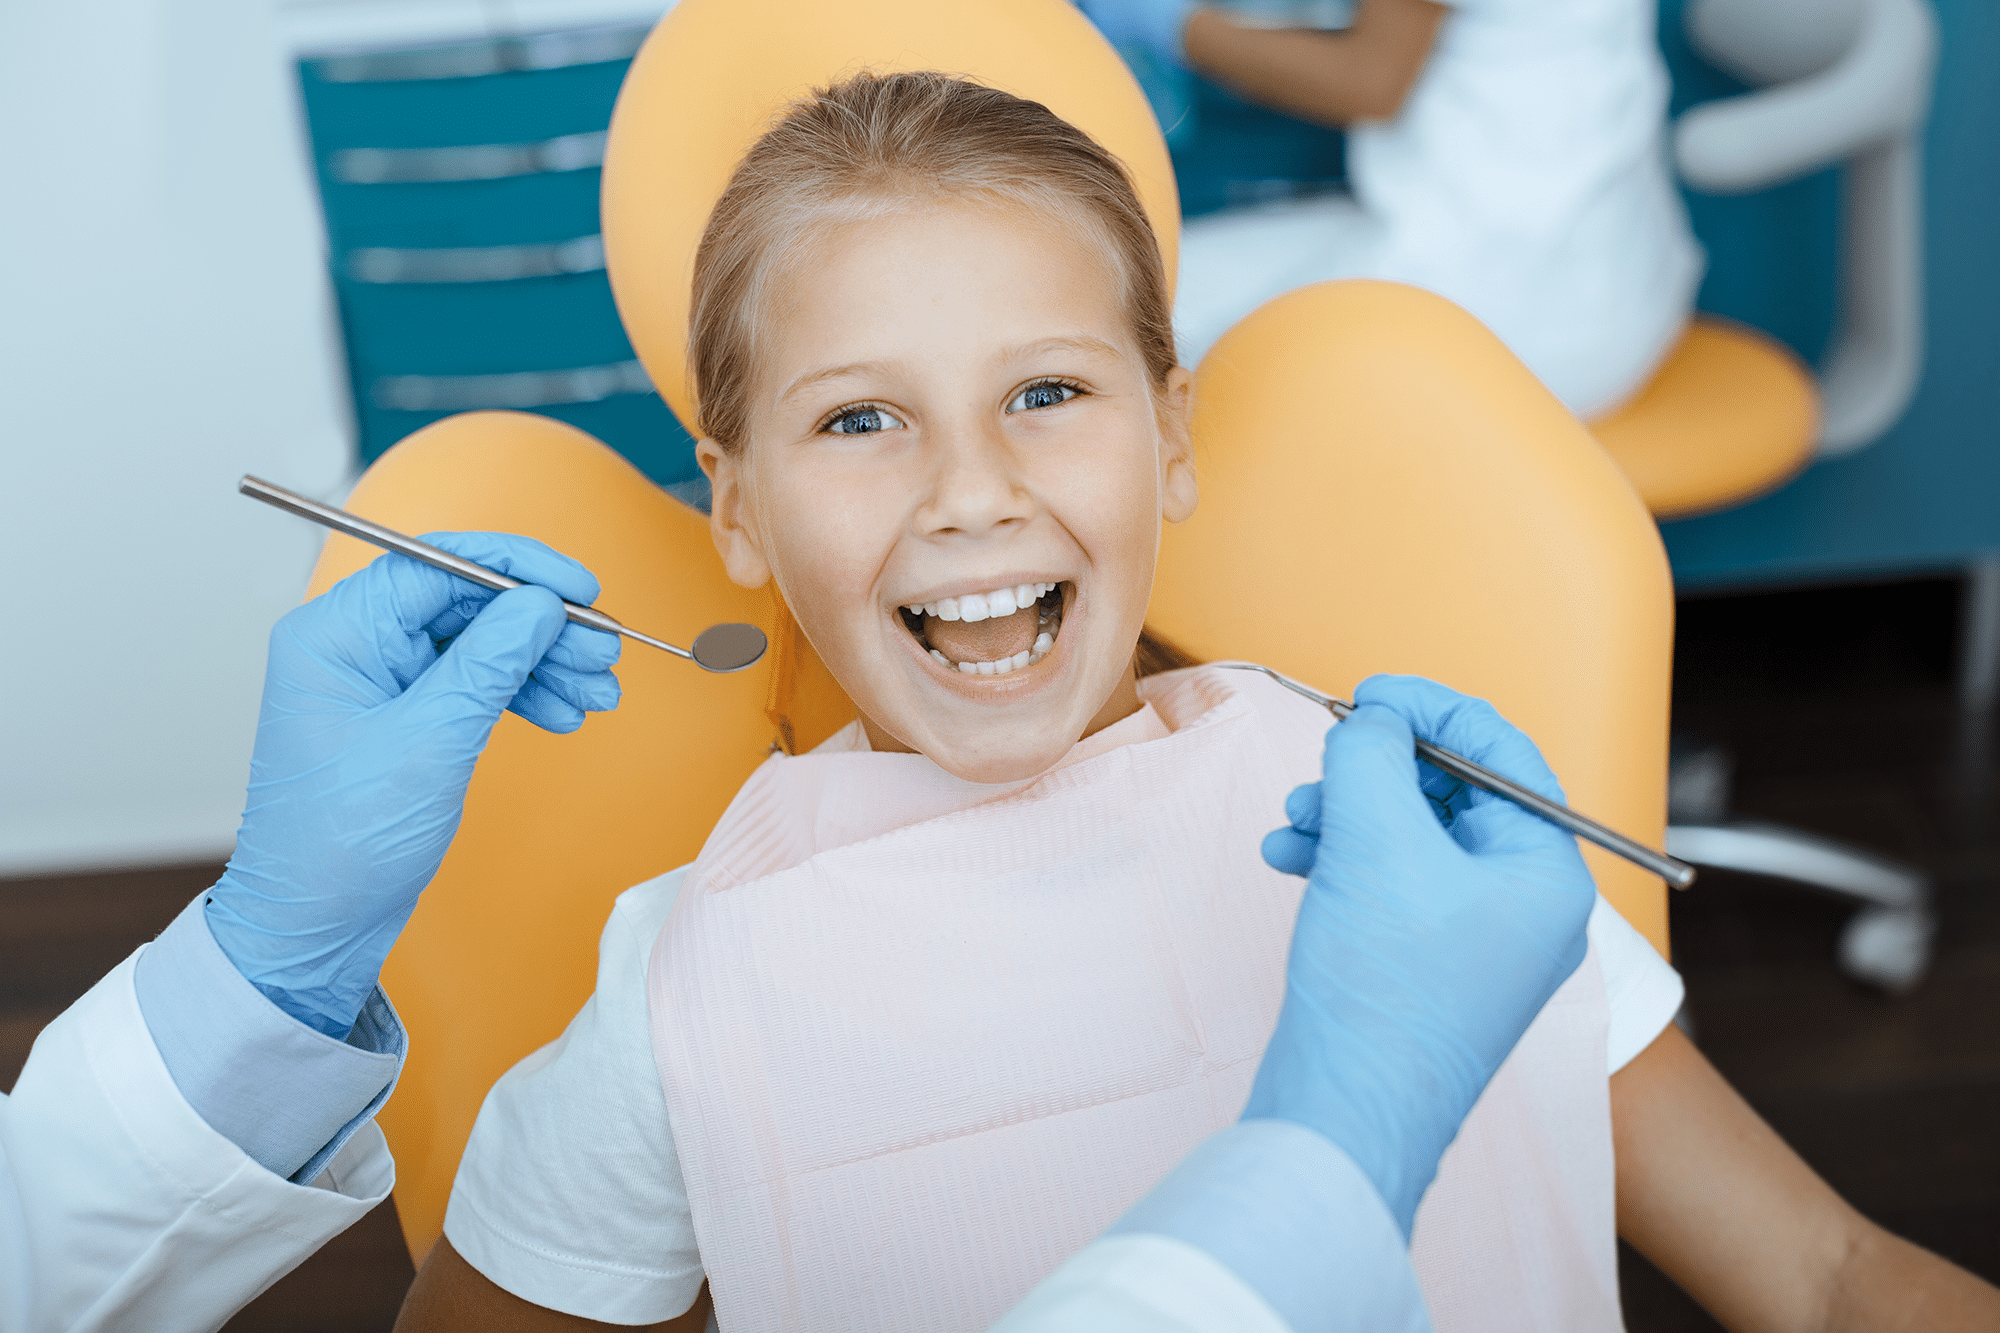 Bring Your Kids To Our Friendly Family Dentist Dr. Rossow DDS, Laura Noce DMD, Joseph Burns DDS, Cheri Neal DDS. Aspen Dental General, Cosmetic, Restorative, Preventative, Family Dentistry dentist in Denver CO 80206 aspen dental dentist in cherry creek denver co